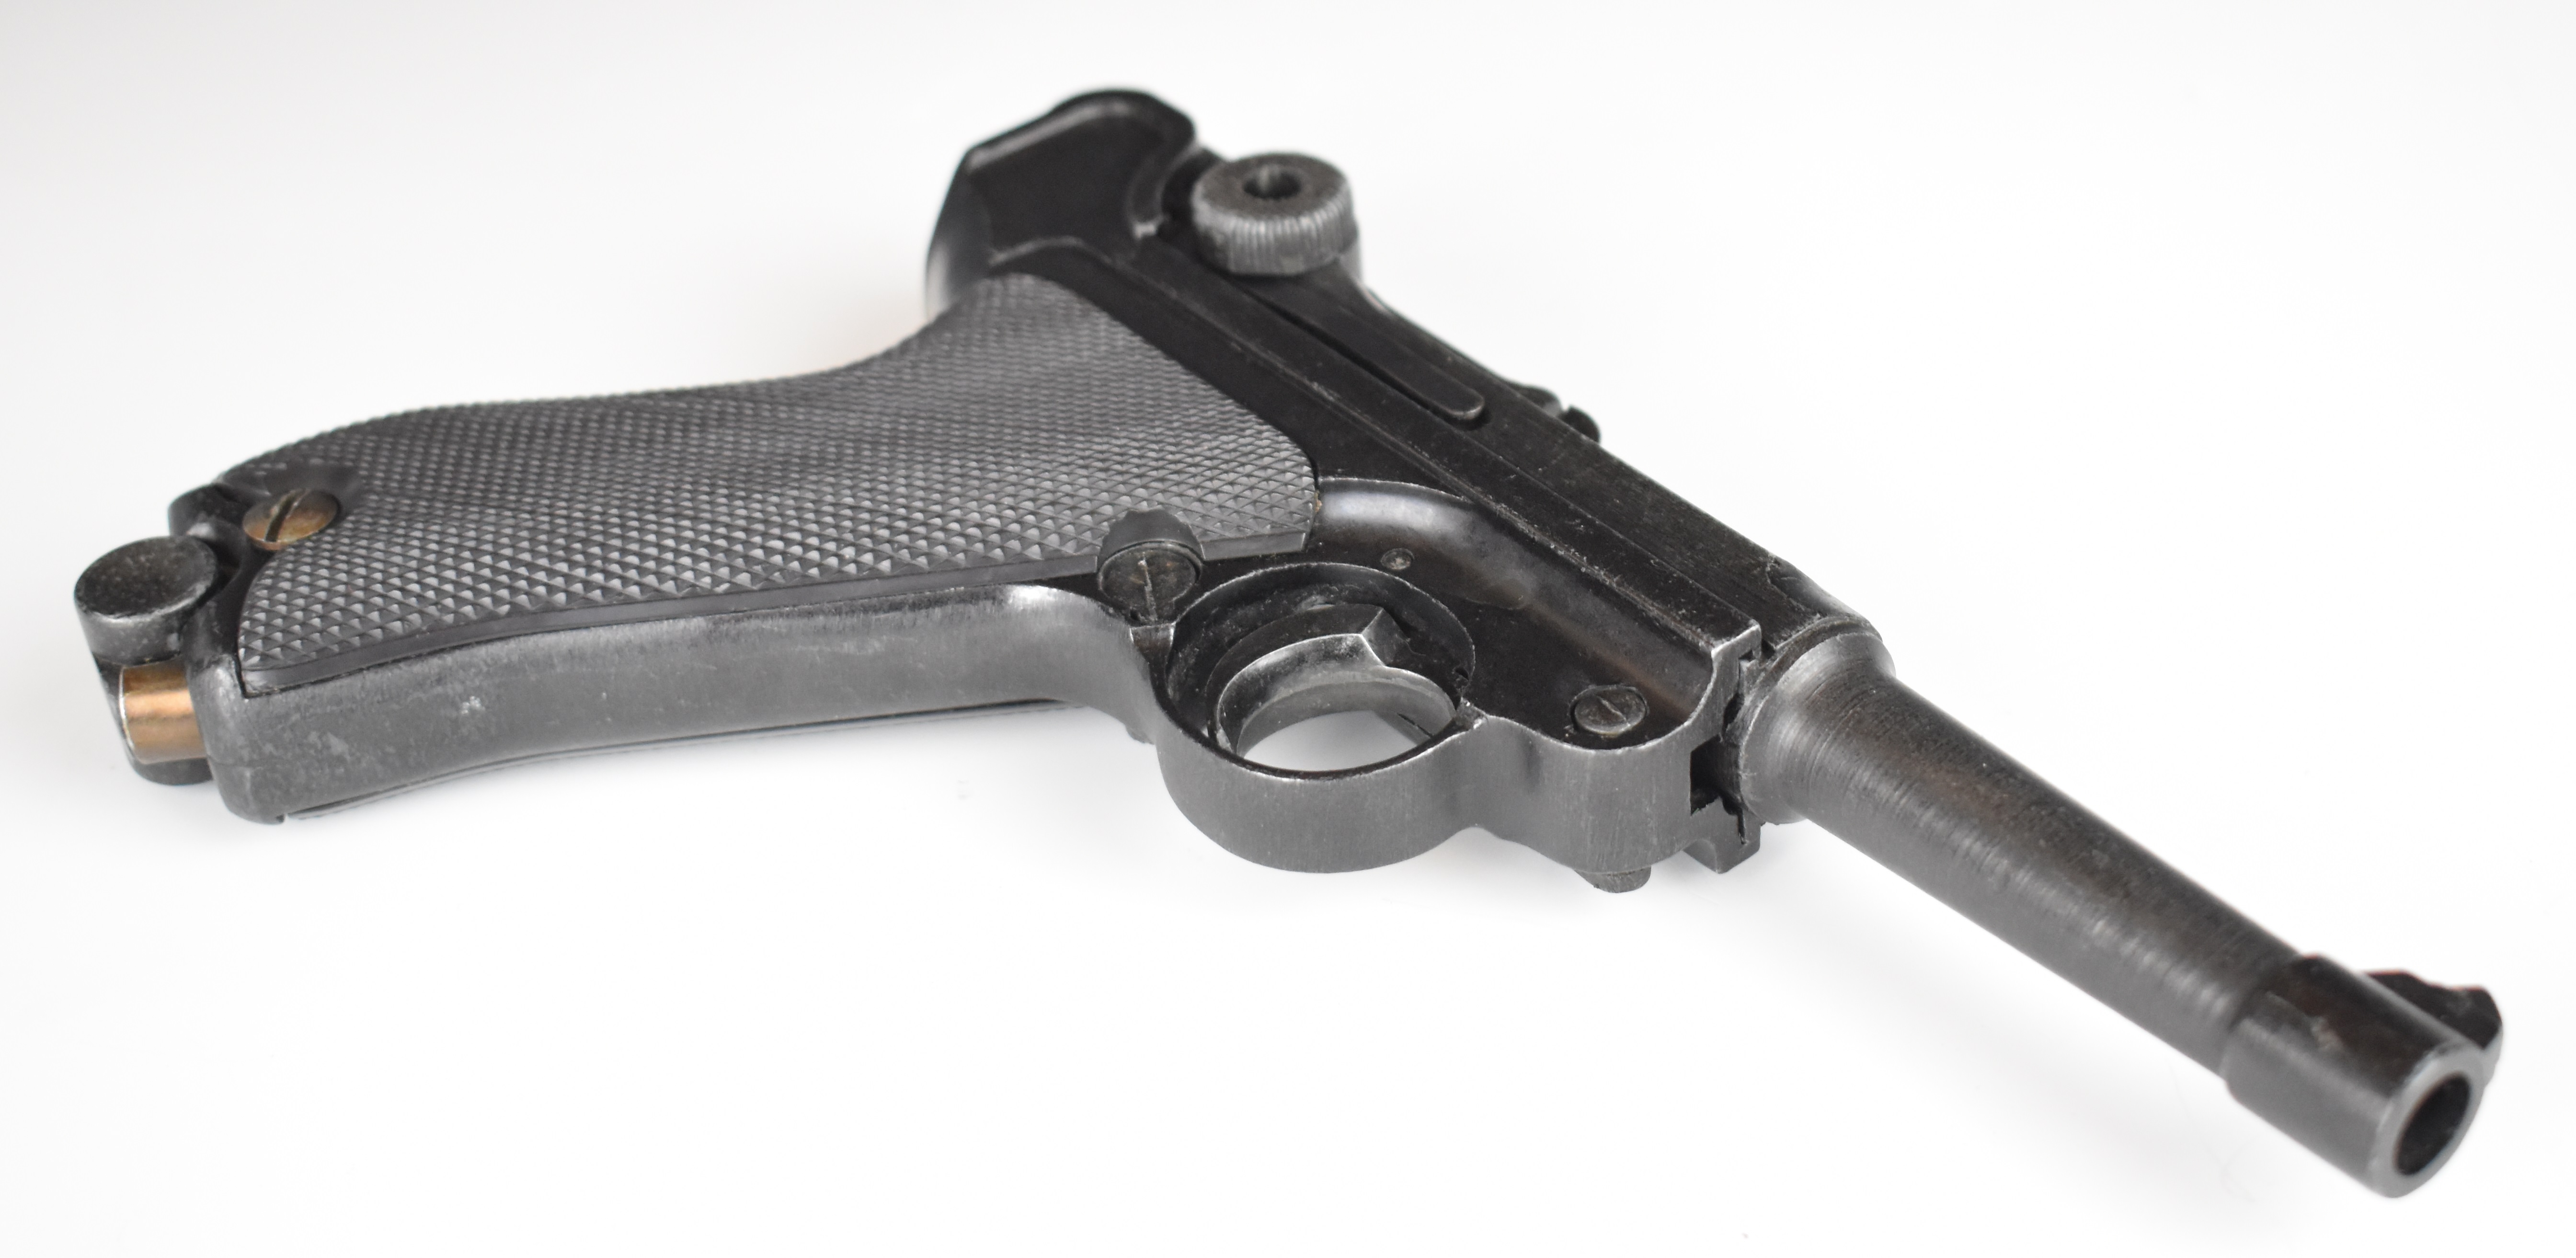 RMI P-08 Parabellum Selbstloade Militarish Luger pistol with chequered grips and dummy rounds, in - Image 17 of 24